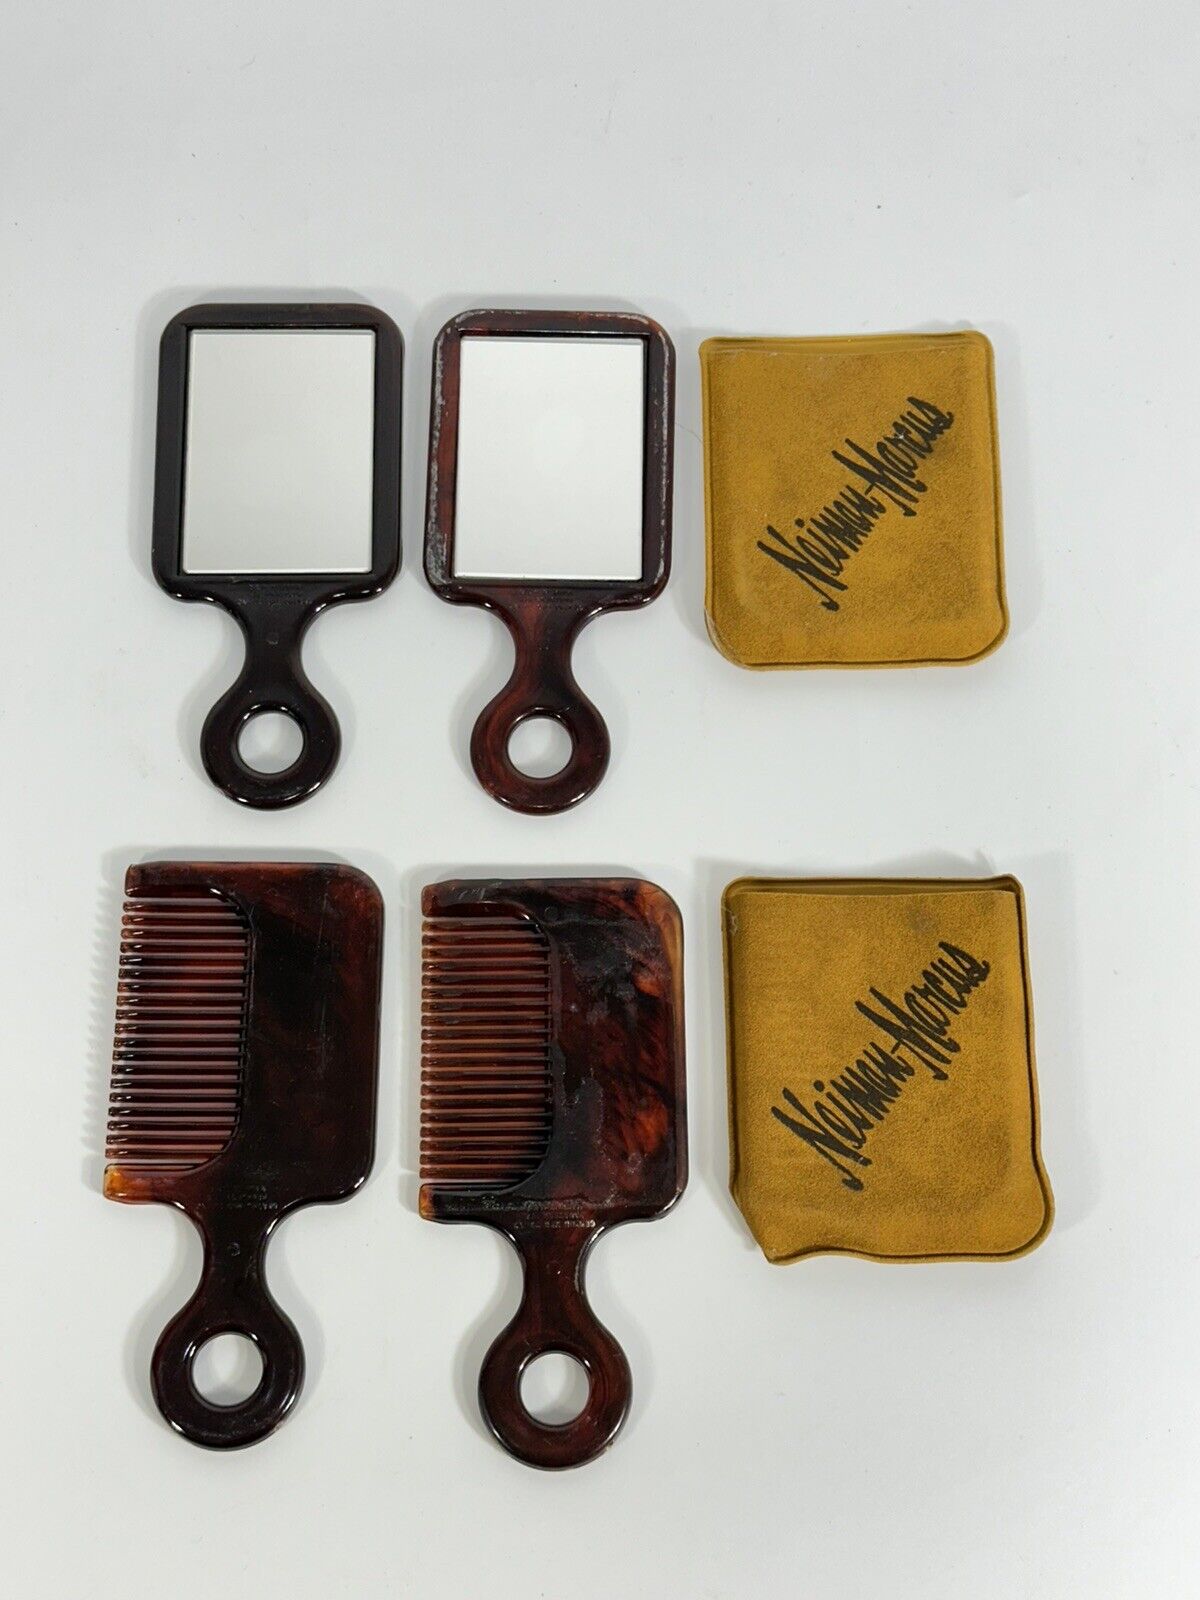 2 Pair of Vintage Centro Comb & Mirror Set with Neiman Marcus Cover ~ USA